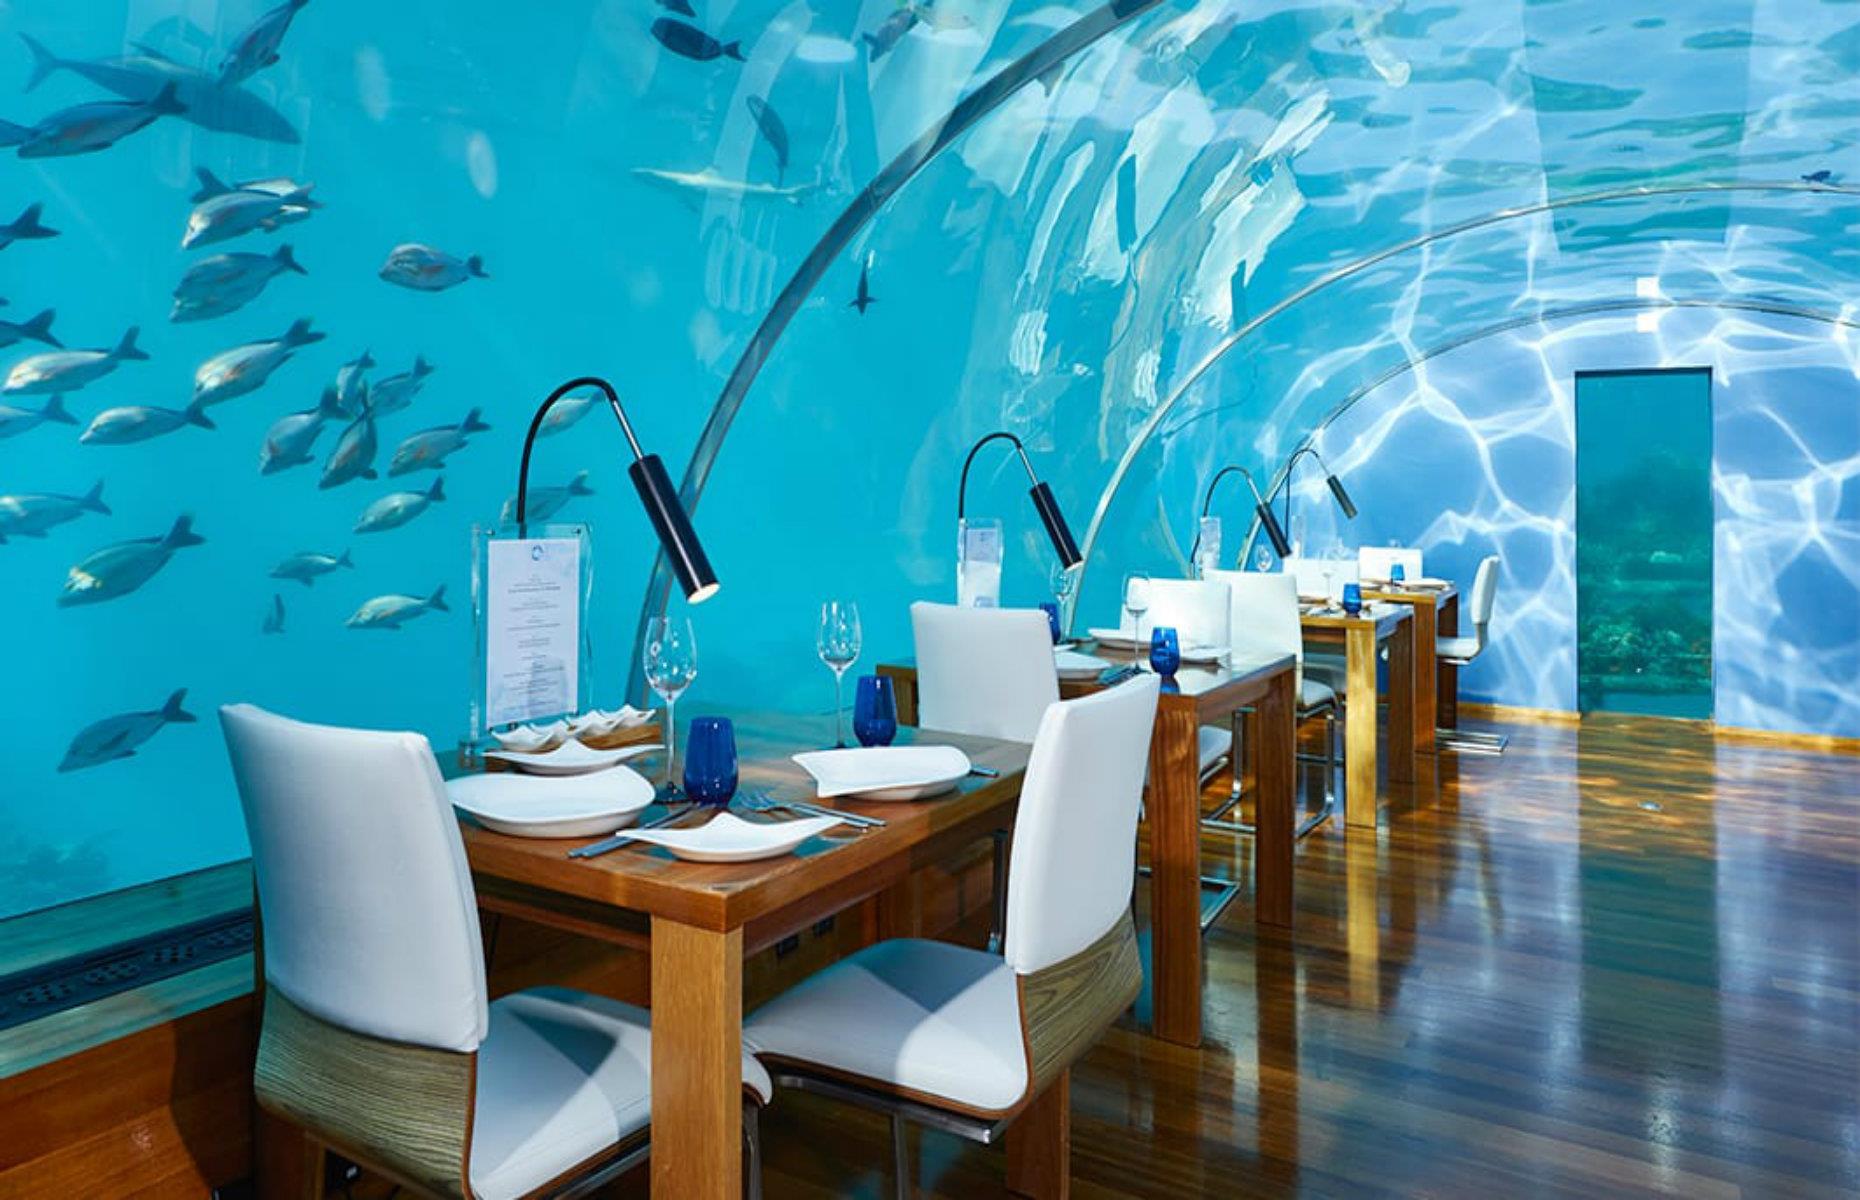 <p>As well as its exclusive undersea suite, the Conrad resort also lays claim to having the world’s first all-glass undersea restaurant. The small but spectacular Ithaa Undersea Restaurant (pictured) opened in 2005 and lies 16 feet (5m) below the ocean's surface. It serves up sensational views of the surrounding corals and ocean life to 14 diners along with a menu of contemporary European cuisine and fine wines. Check out these <a href="https://www.loveexploring.com/galleries/100304/40-places-you-wont-believe-are-on-earth">jaw-dropping places you won't believe are on Earth</a>. </p>